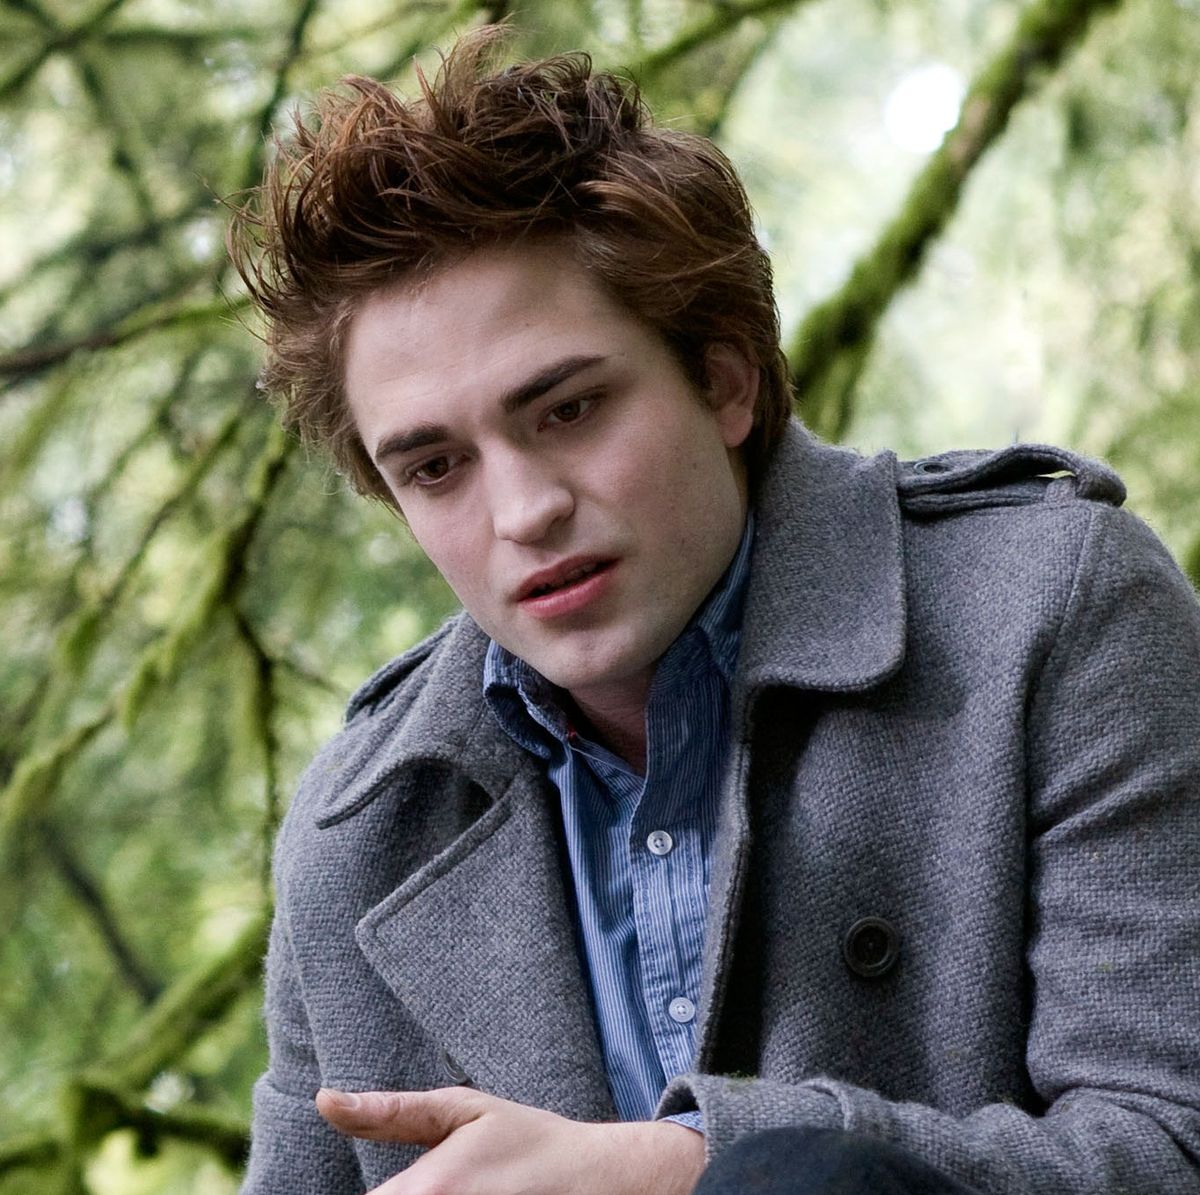 Top 999+ edward cullen images – Amazing Collection edward cullen images Full 4K